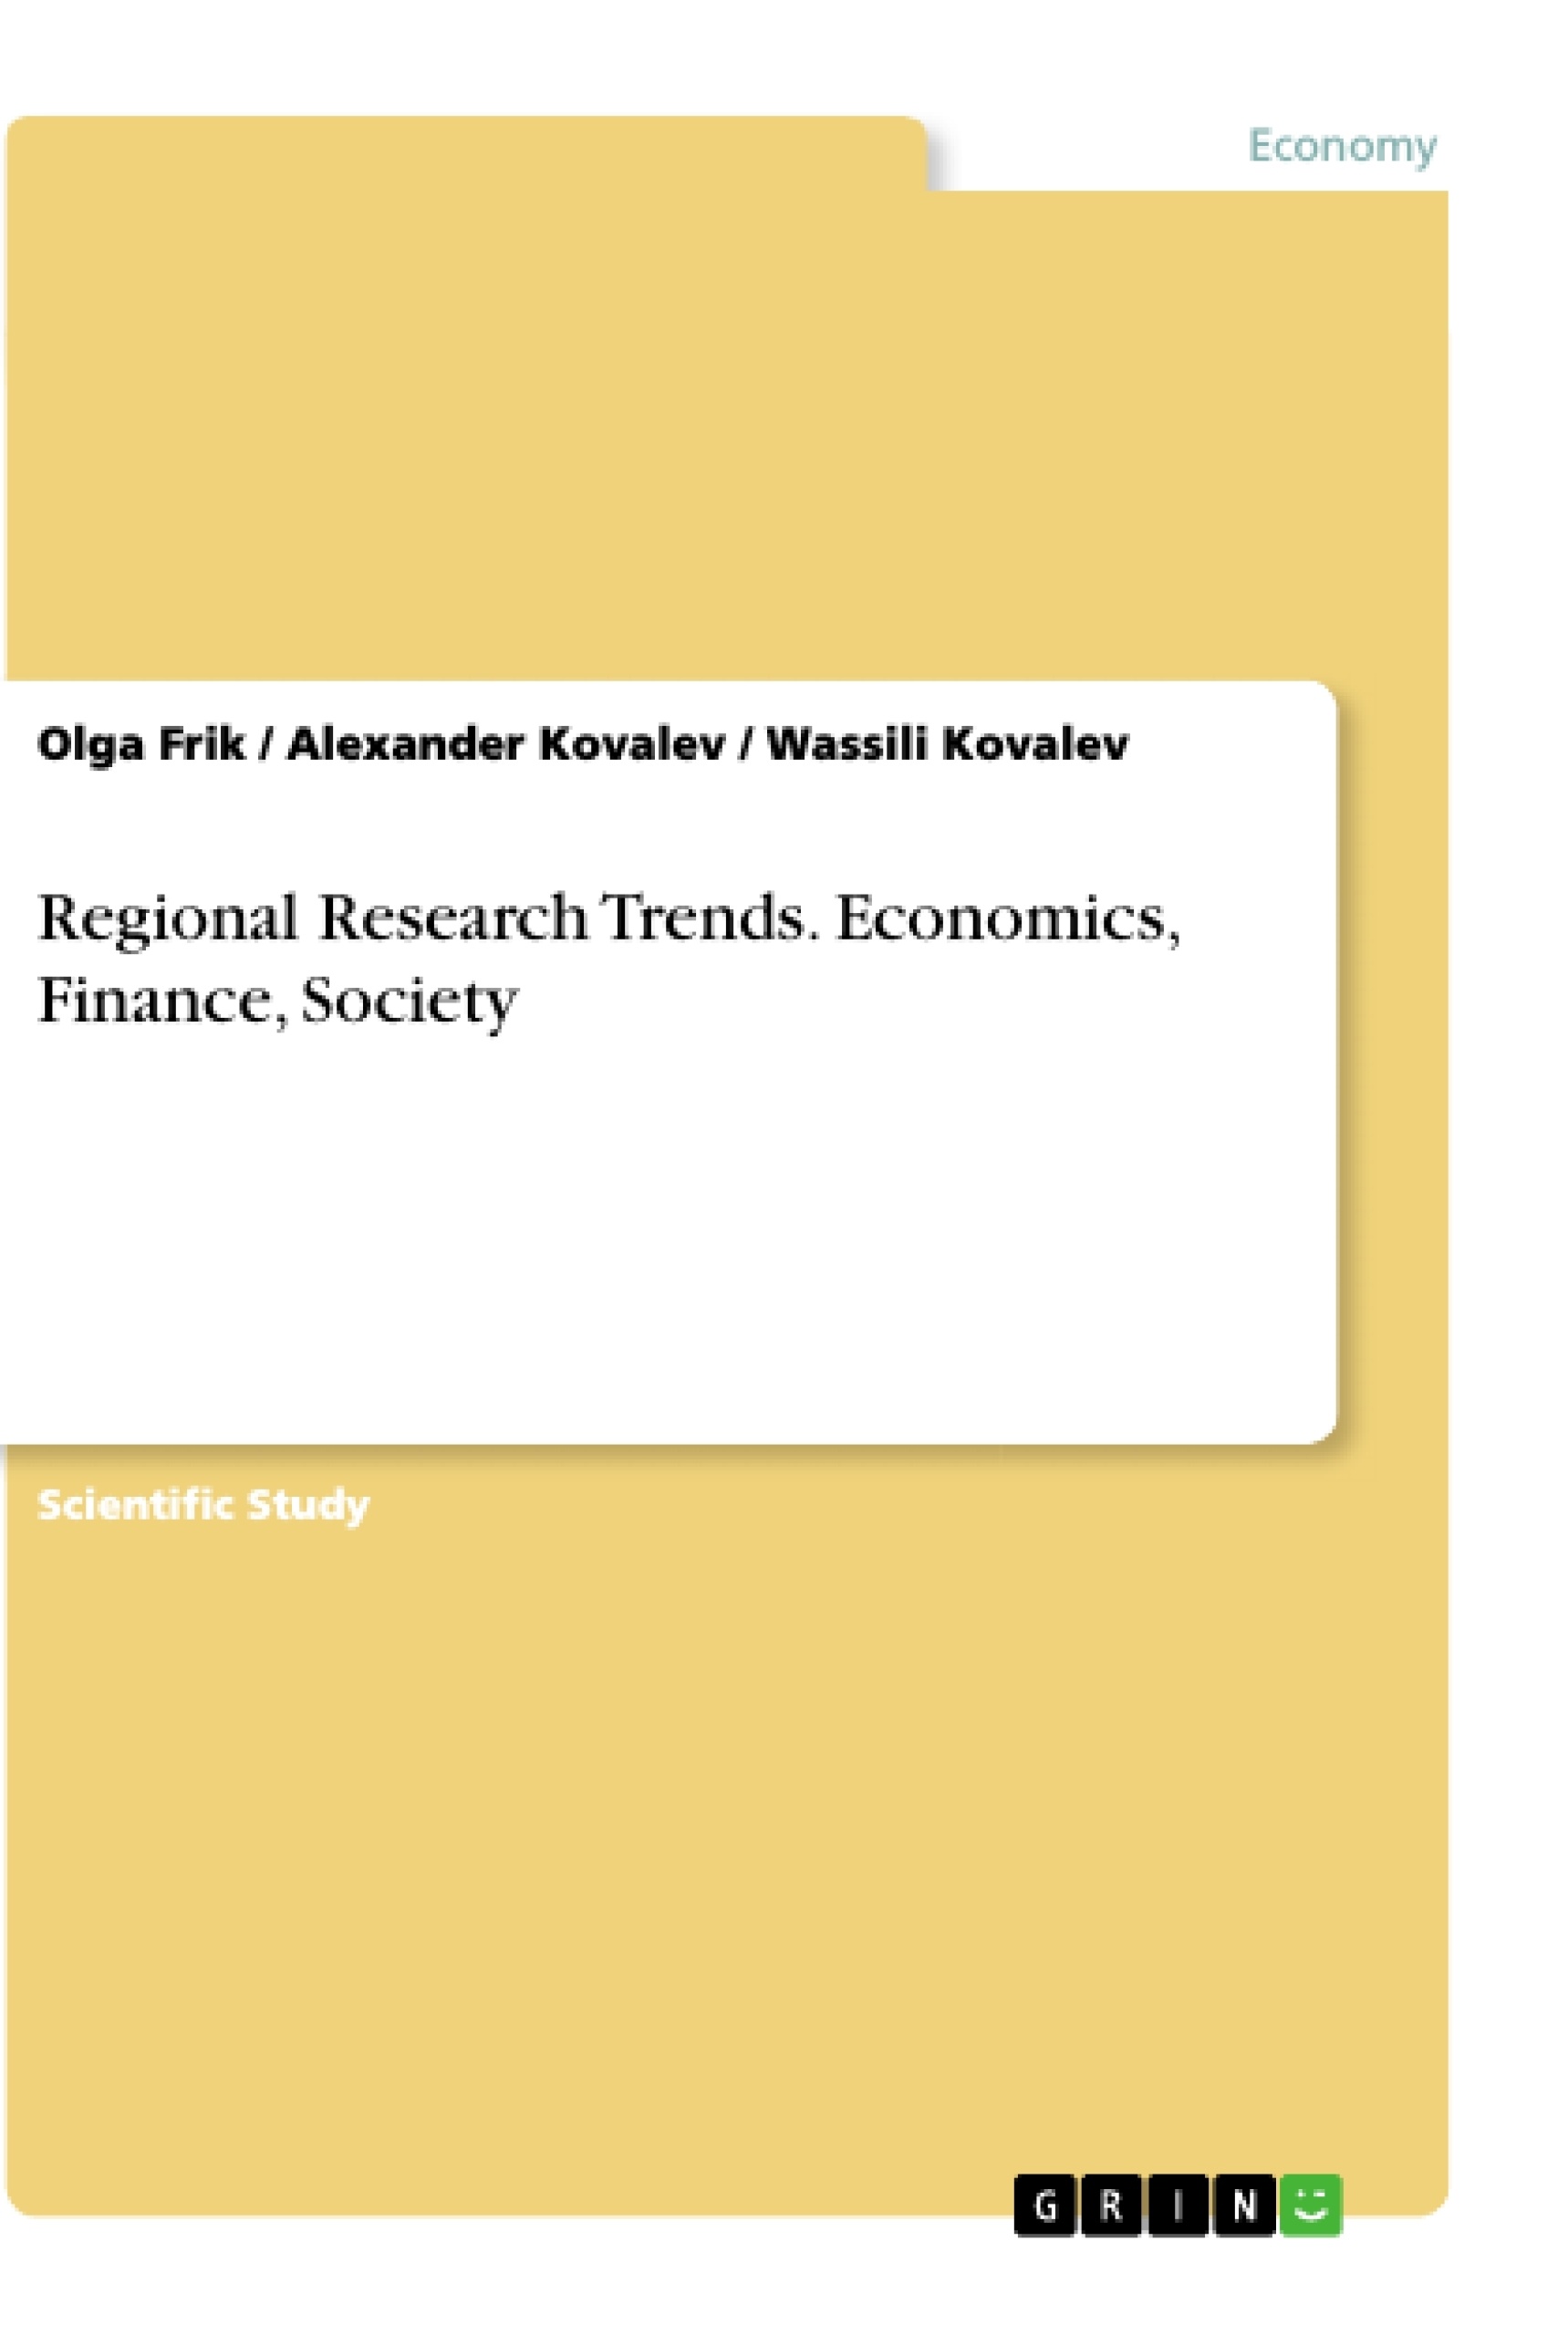 Title: Regional Research Trends. Economics, Finance, Society